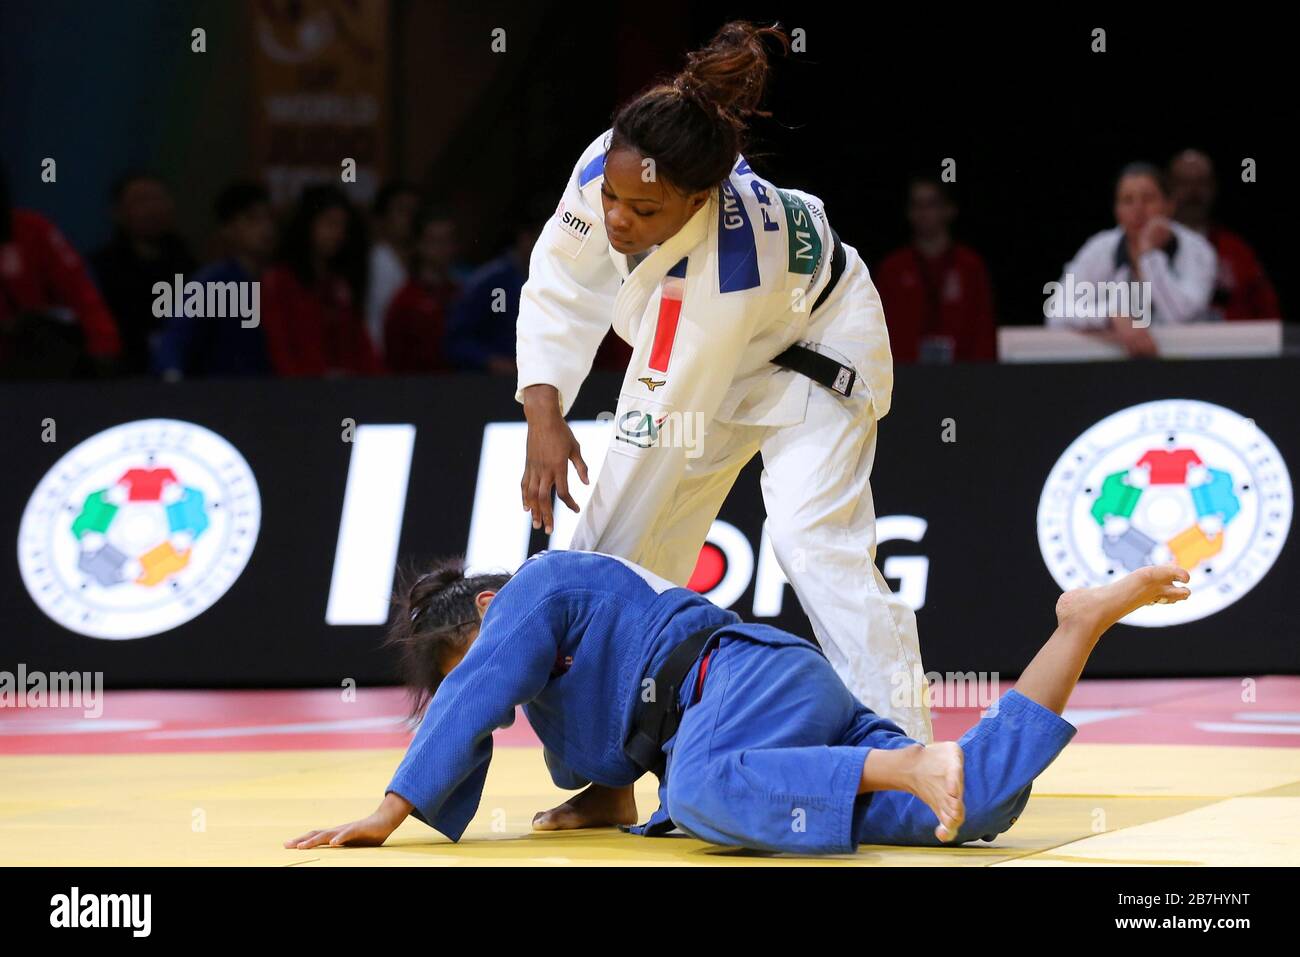 Paris, France - 08th Feb, 2020: Astrid Gneto for France against Carbajal Gamarra for Peru, Women's -52 kg, Round two (Credit: Mickael Chavet) Stock Photo